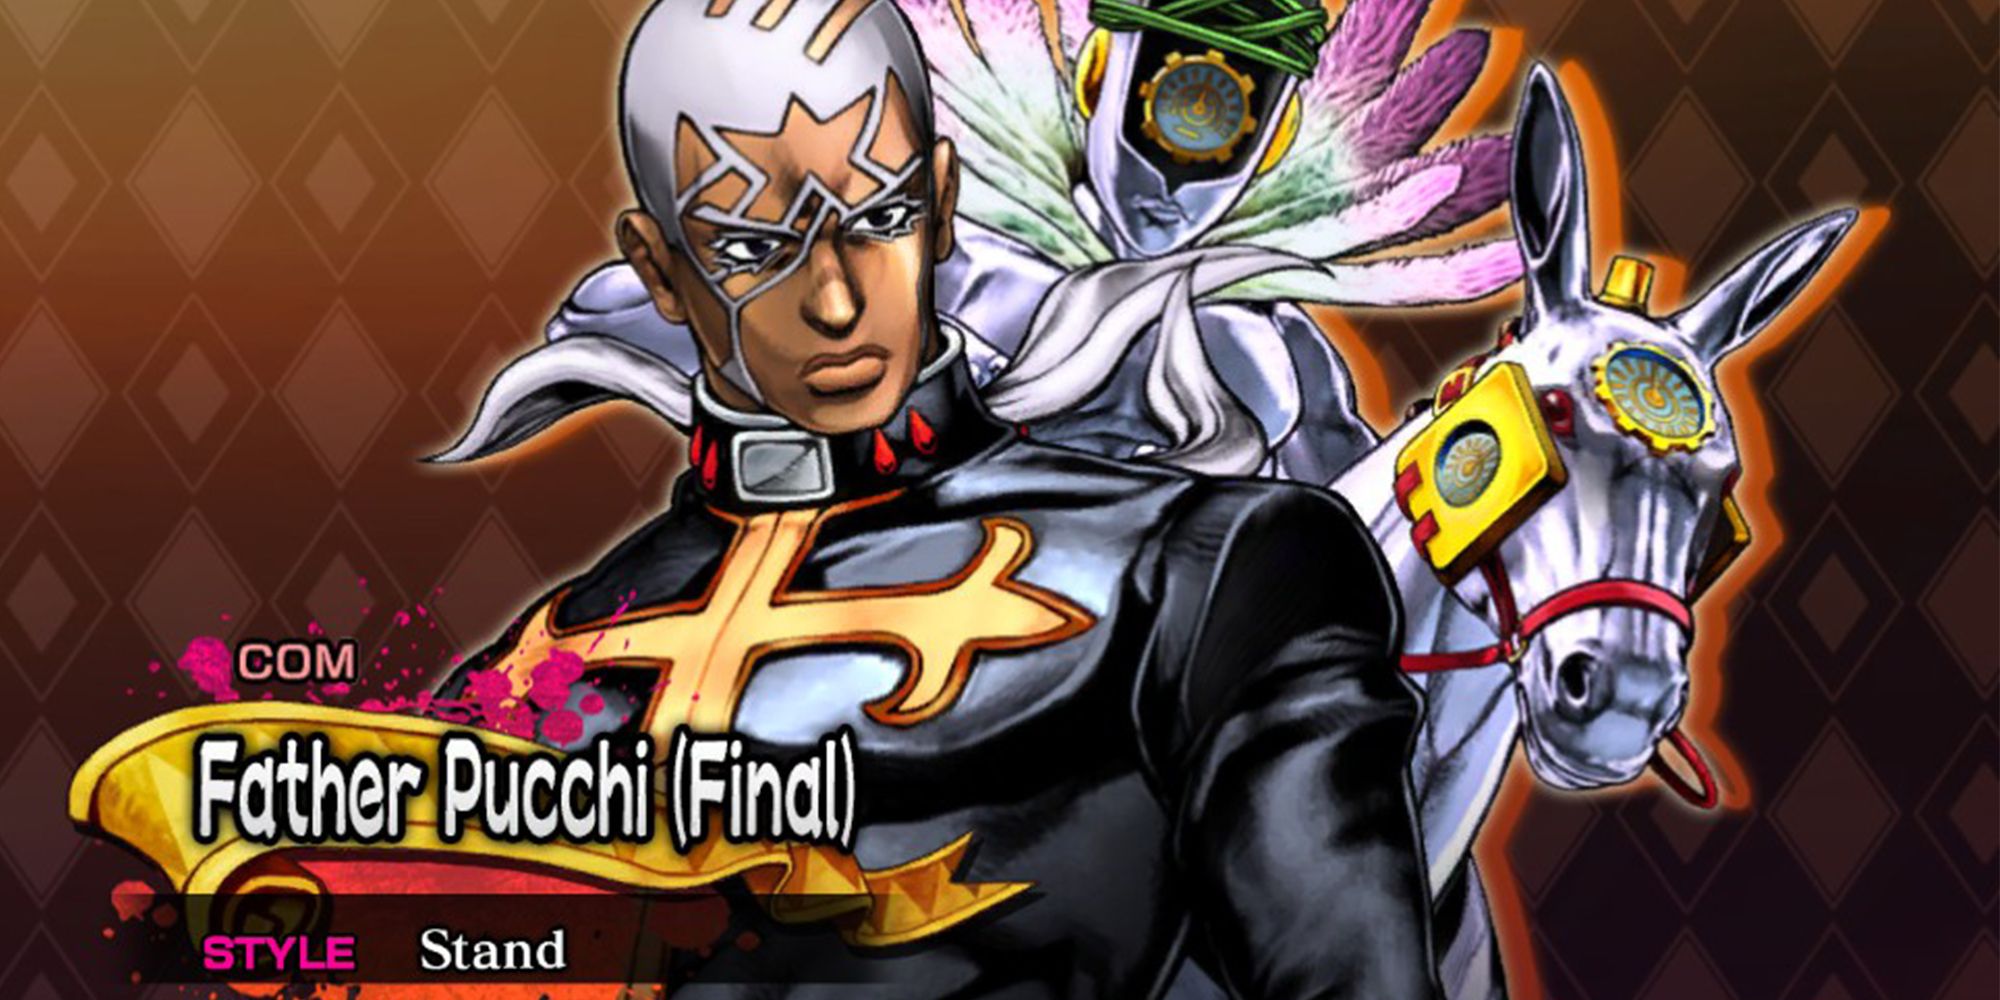 Father Pucchi and his Stand's final form, Maiden Heaven, from JoJo's Bizarre Adventure ASBR.